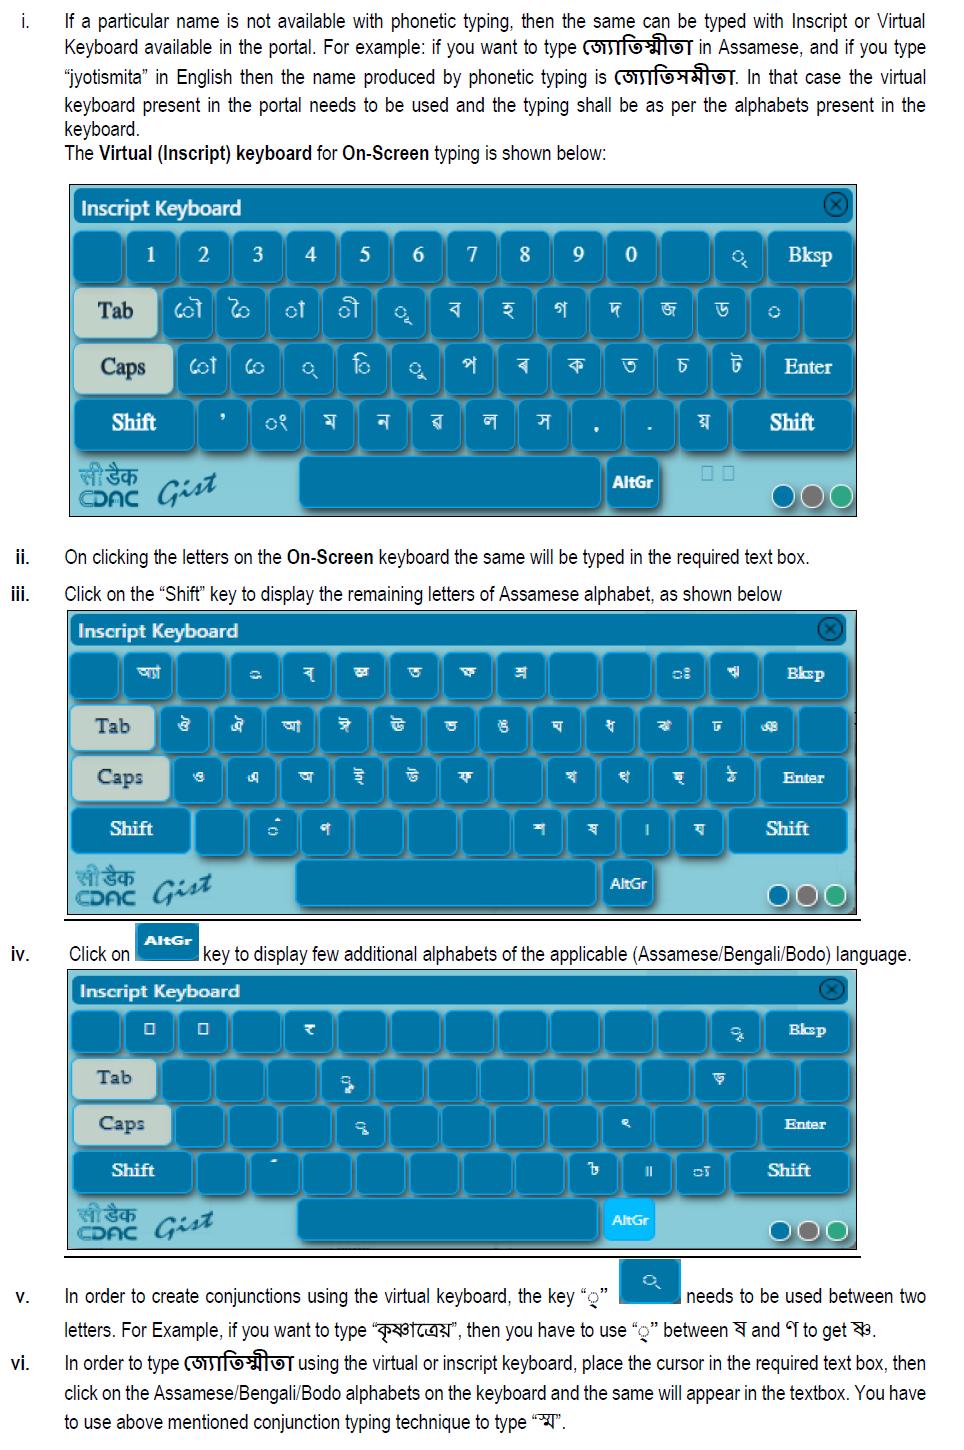 2. Typing with Inscript or Virtual Keyboard: vii. viii. The Bodo names can be corrected only with the virtual/inscript keyboard, and not with the phonetic typing.